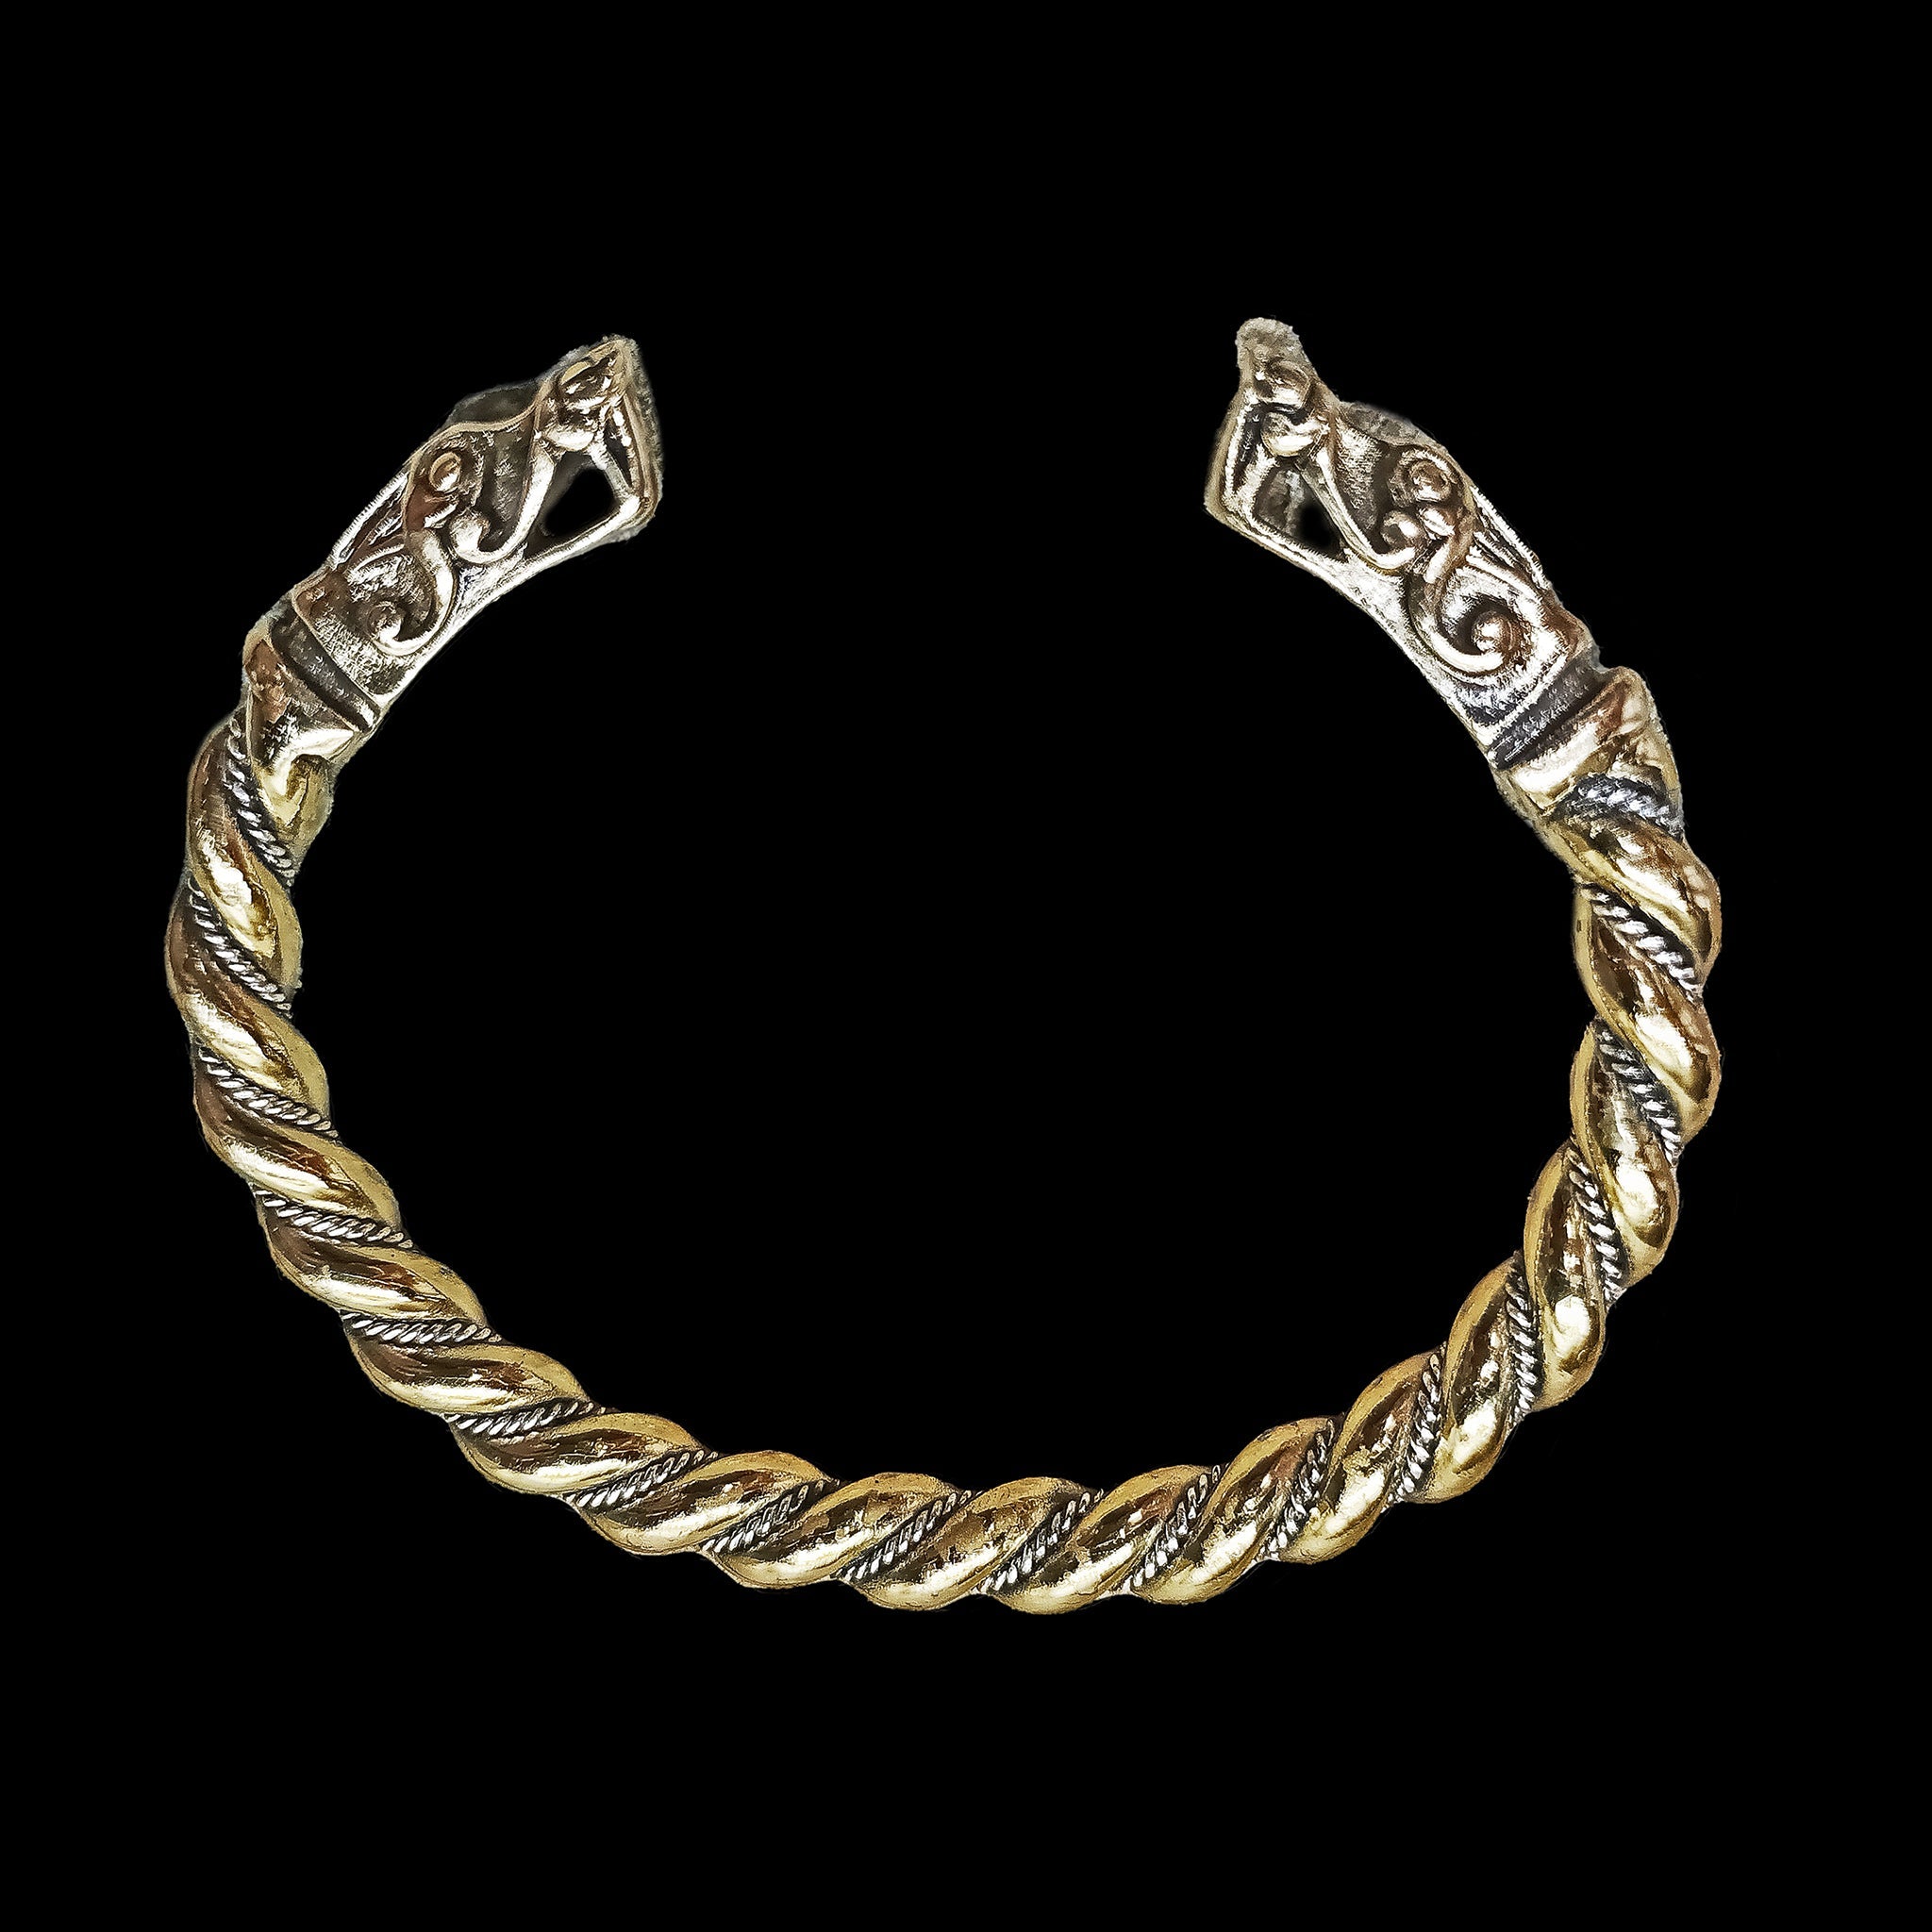 Twisted Bronze and Silver Bracelet With Gotlandic Dragon Heads